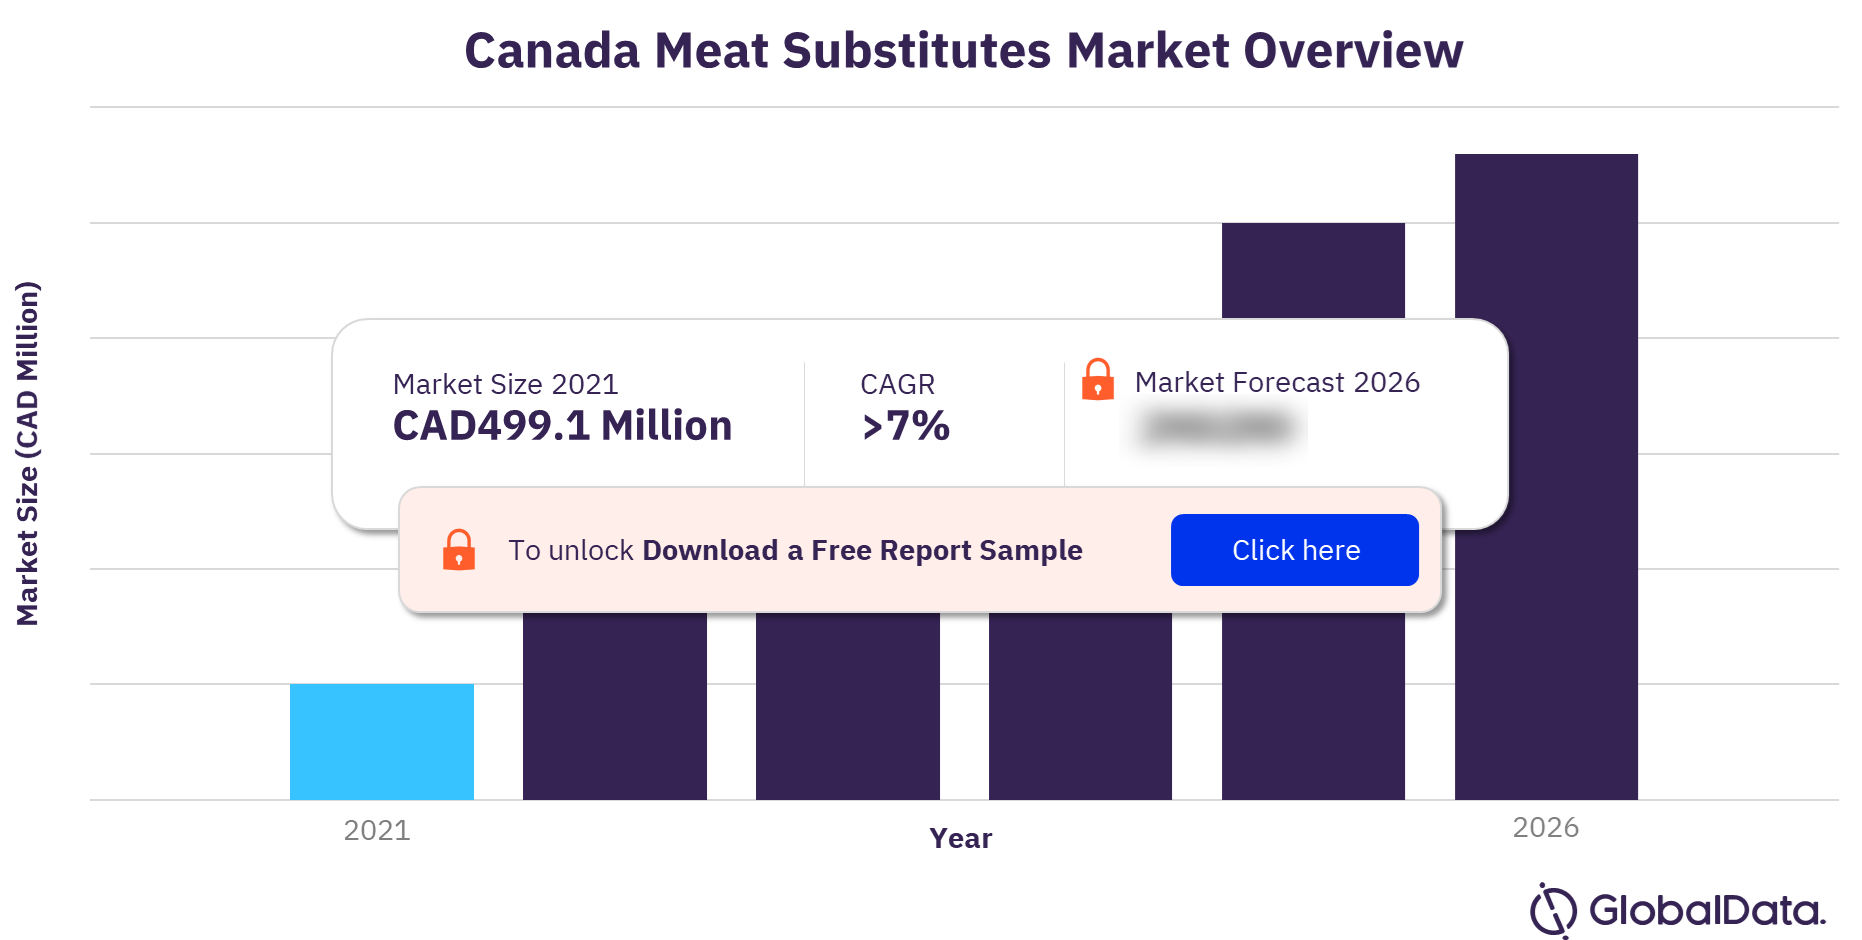 Canada Meat Substitutes Market Size 